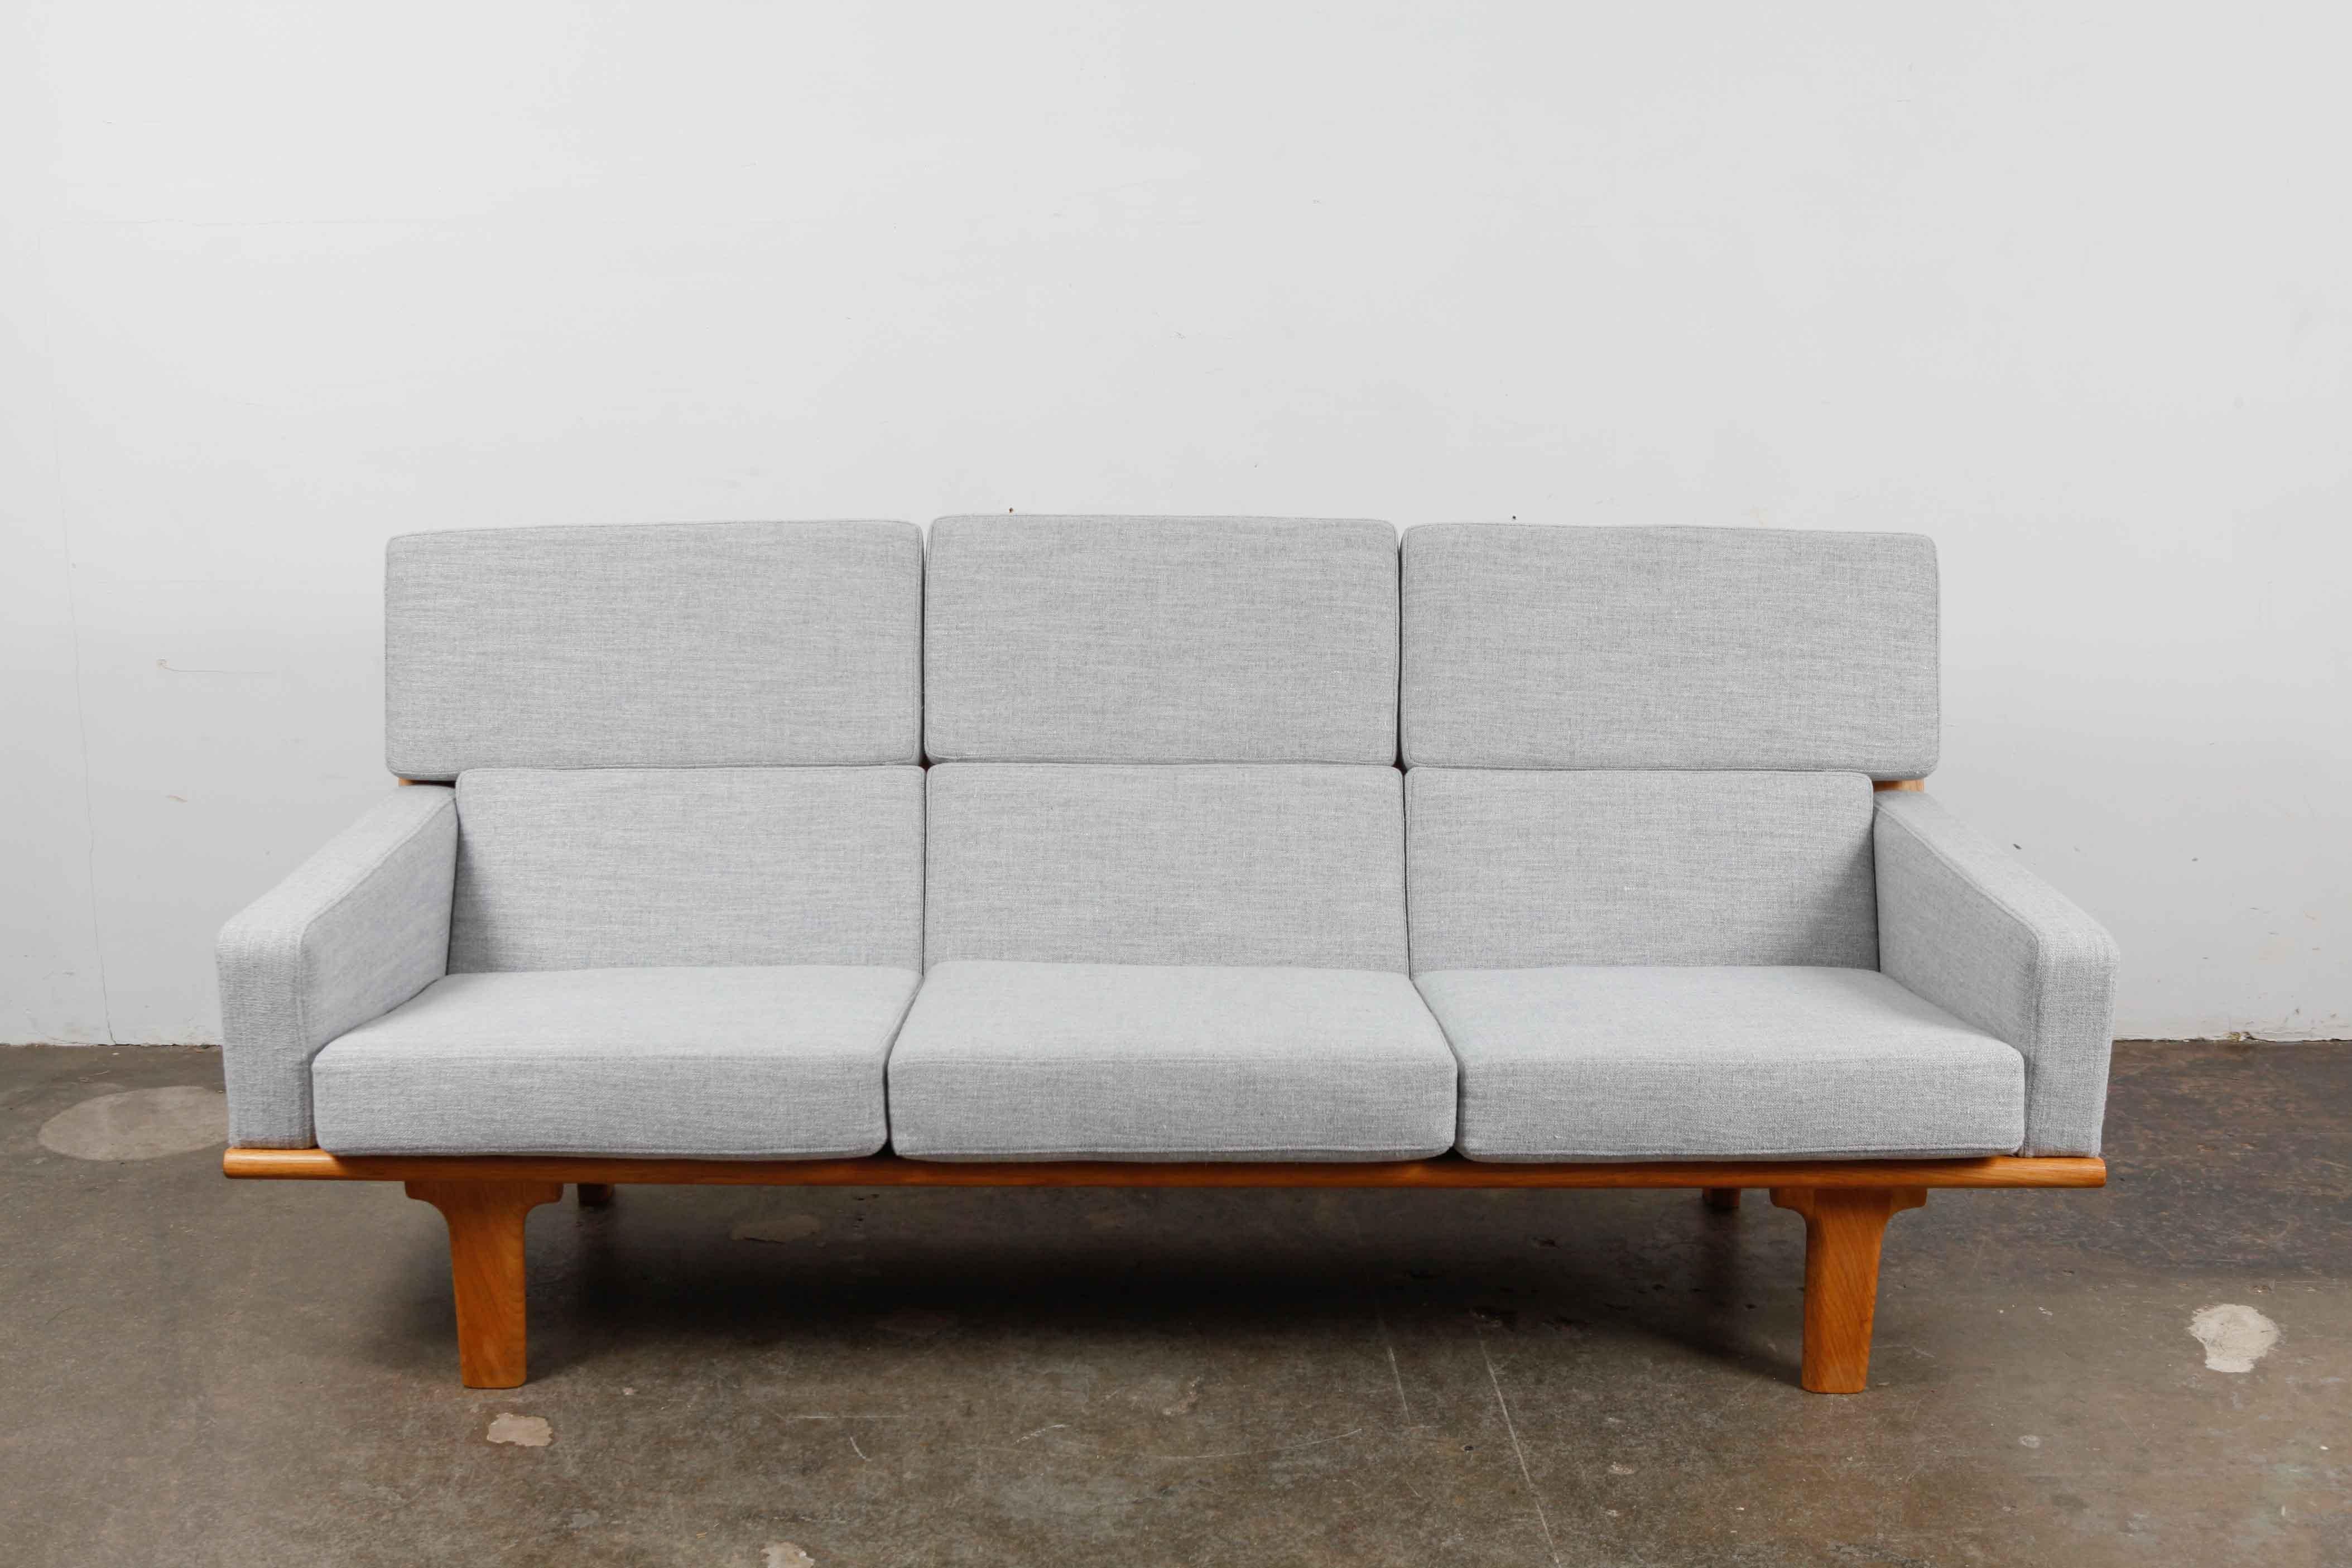 Swedish solid oak framed sofa with high back, newly upholstered in a light blue/gray woven linen fabric with new foam and the frame is completely refinished in a matte natural wax finish. Beautifully exposed back wood frame.